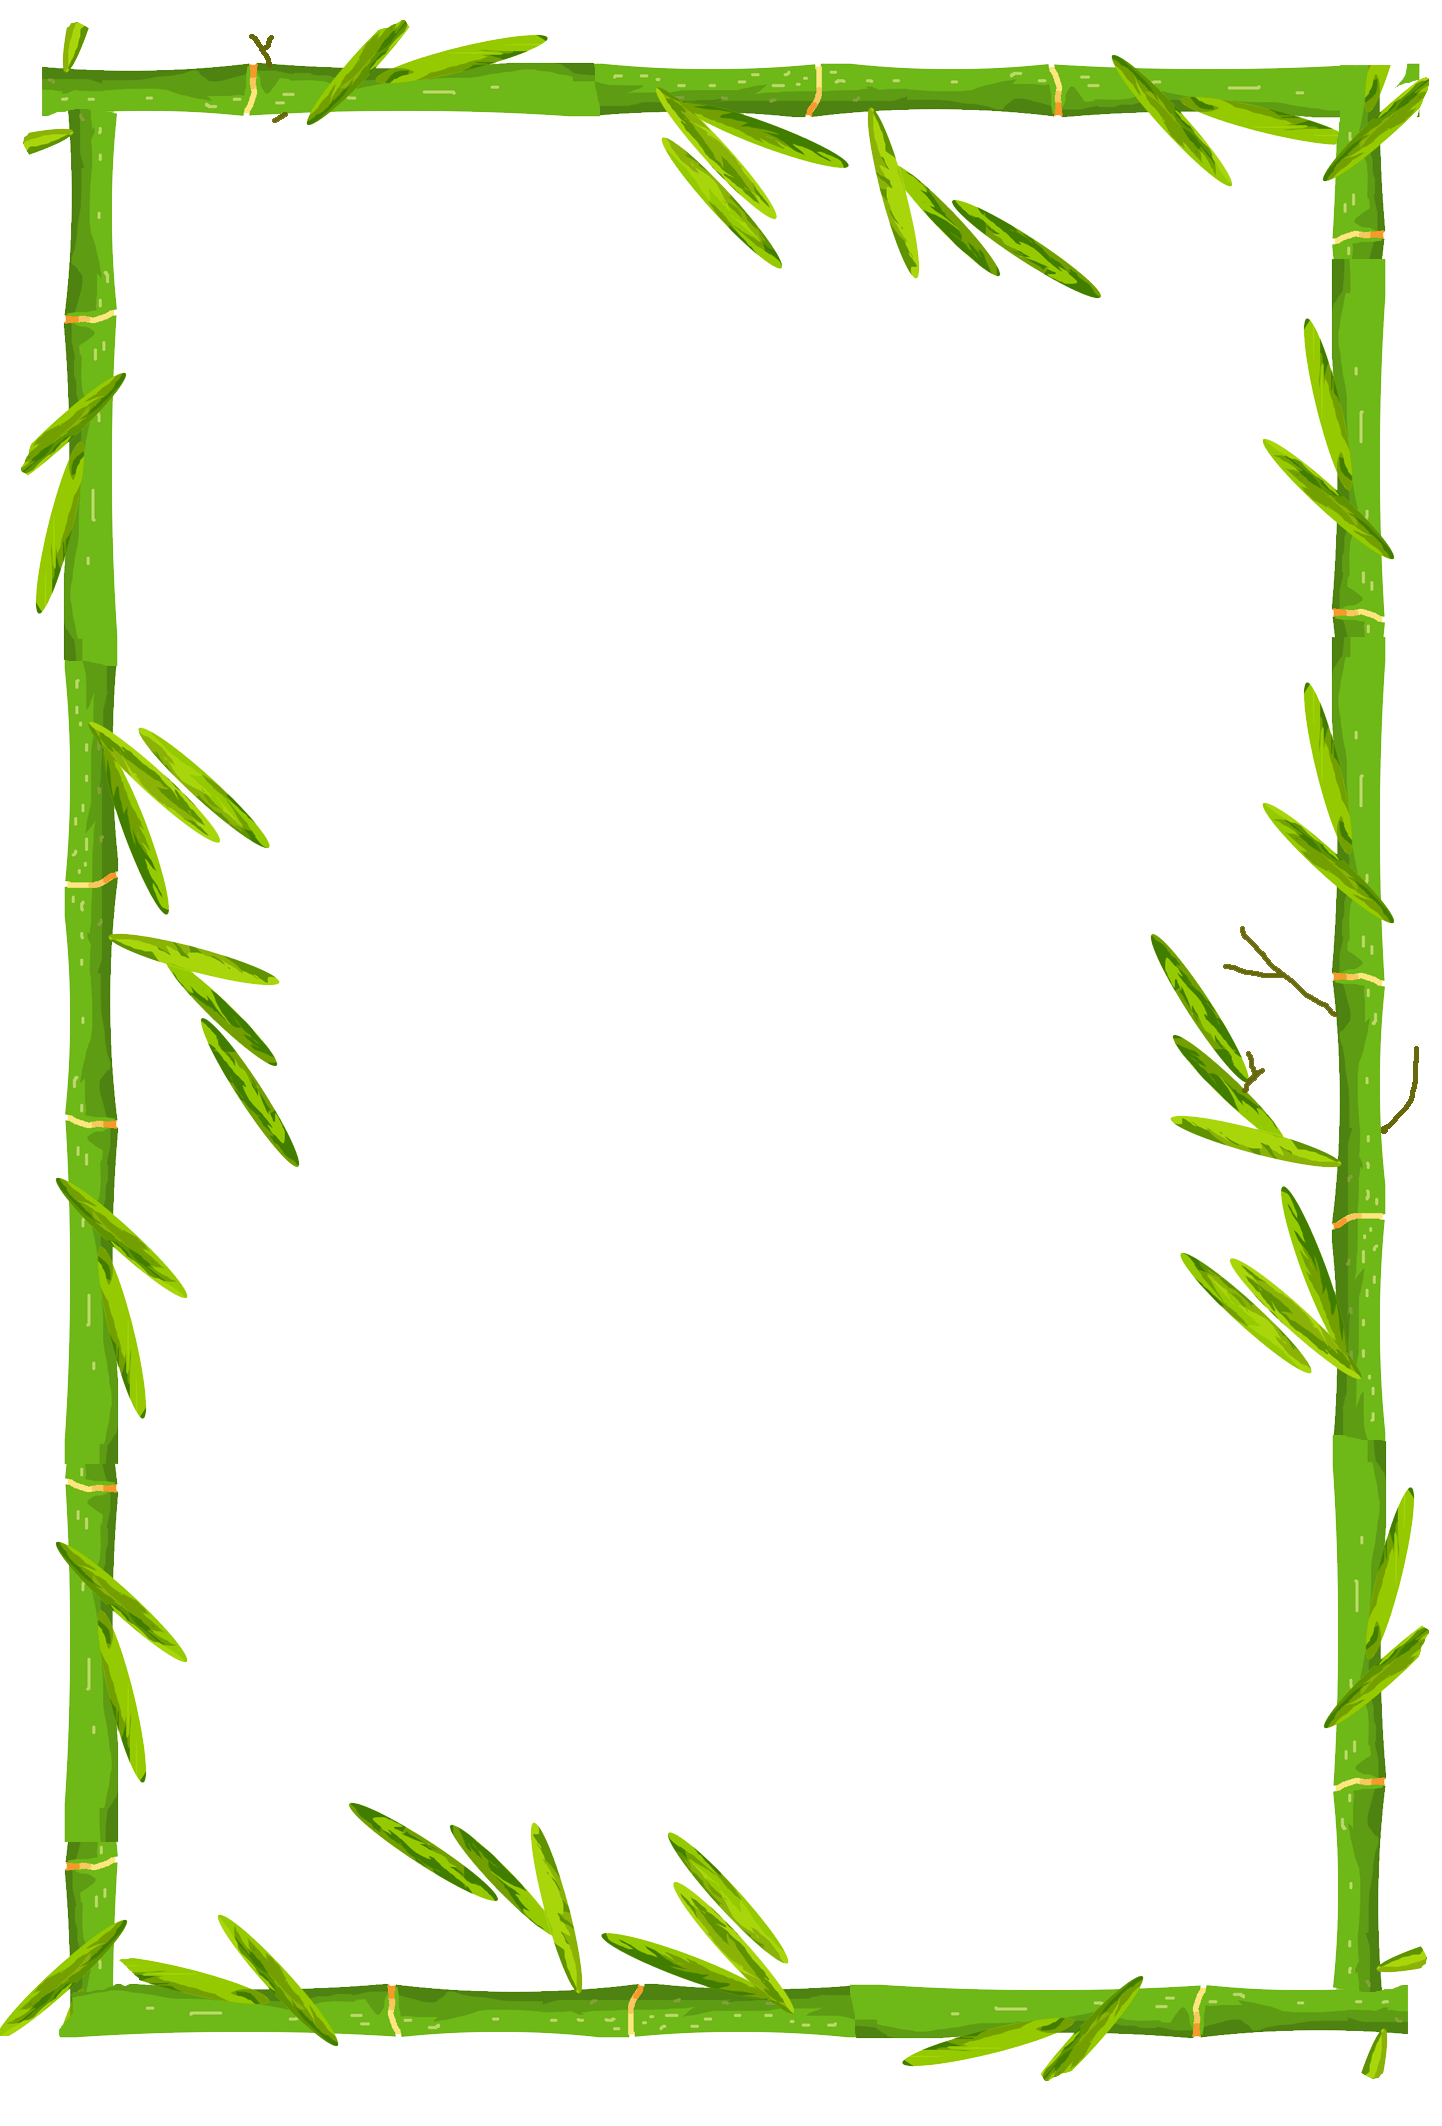 Bamboo Border Download Free Image Clipart